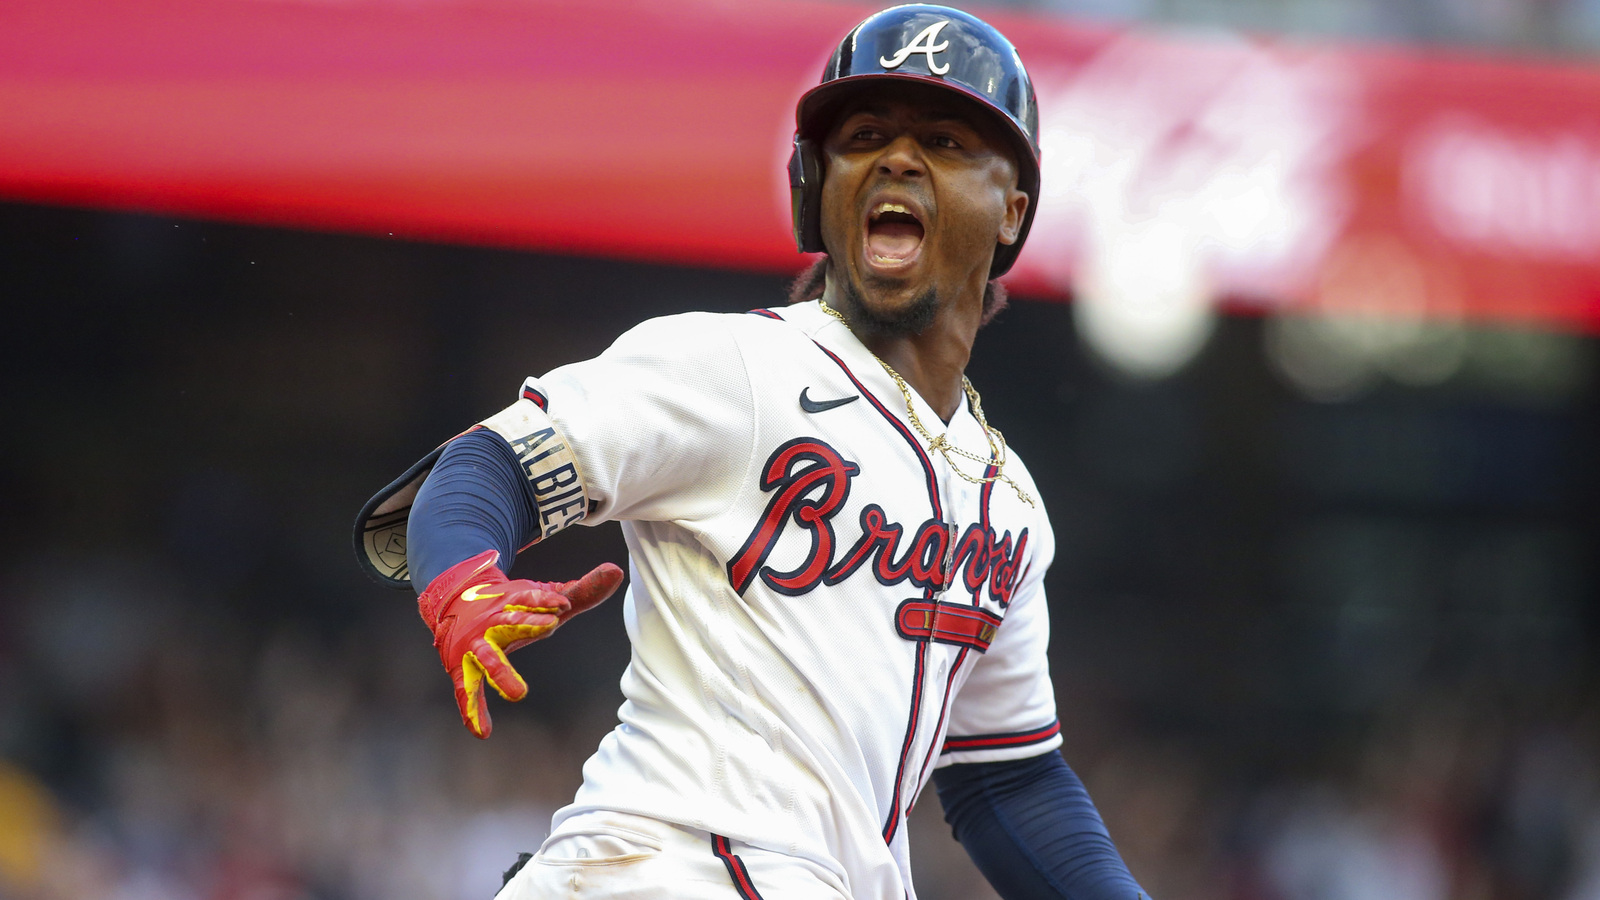 MLB® The Show™ - Keep Swinging in style with the Atlanta Braves